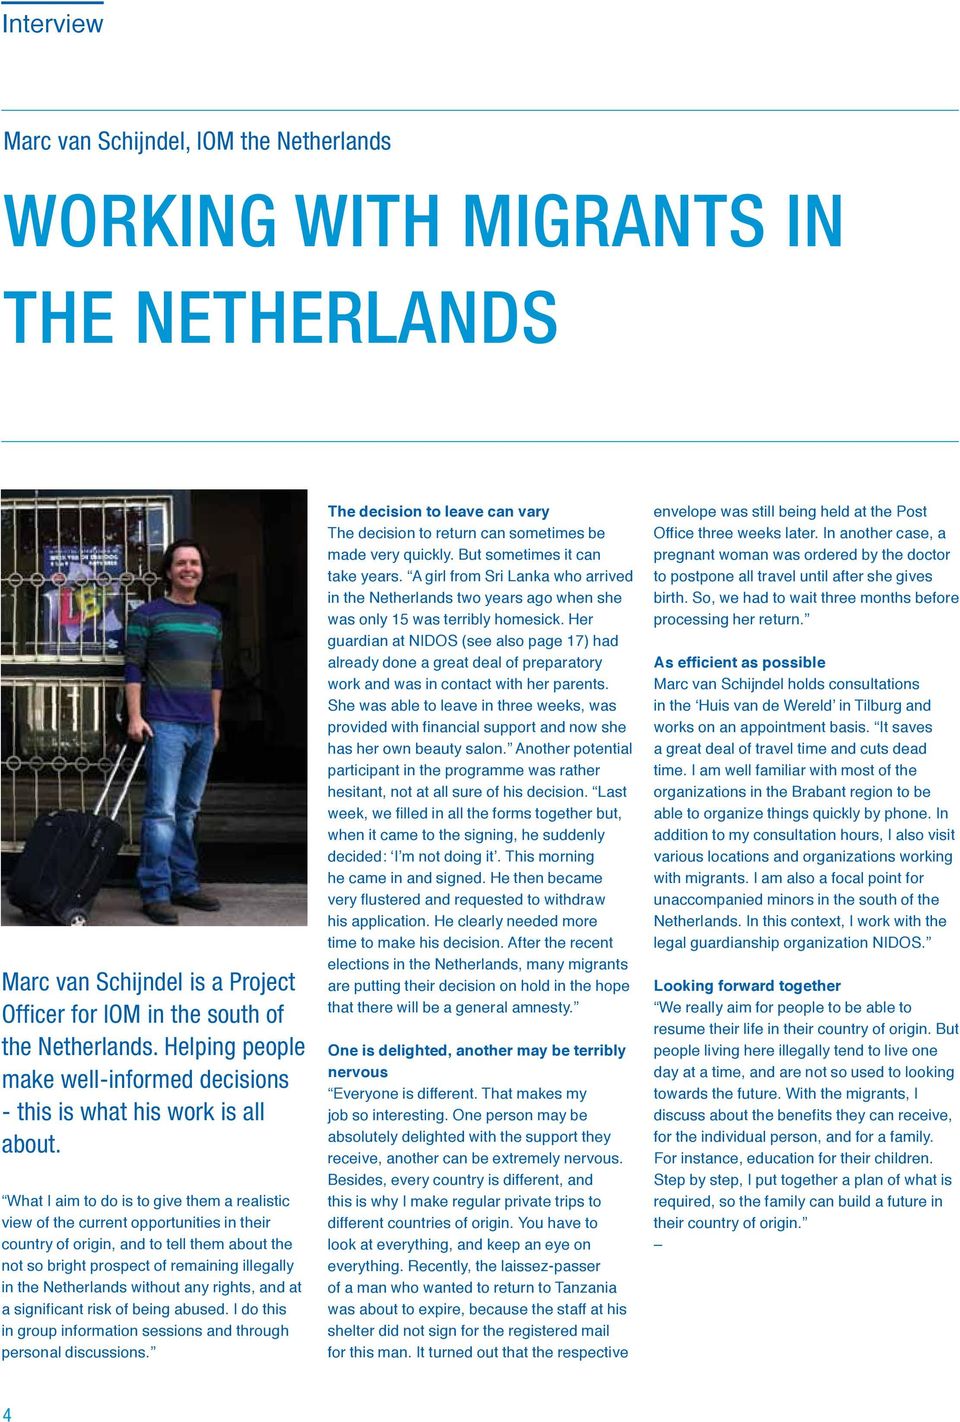 What I aim to do is to give them a realistic view of the current opportunities in their country of origin, and to tell them about the not so bright prospect of remaining illegally in the Netherlands